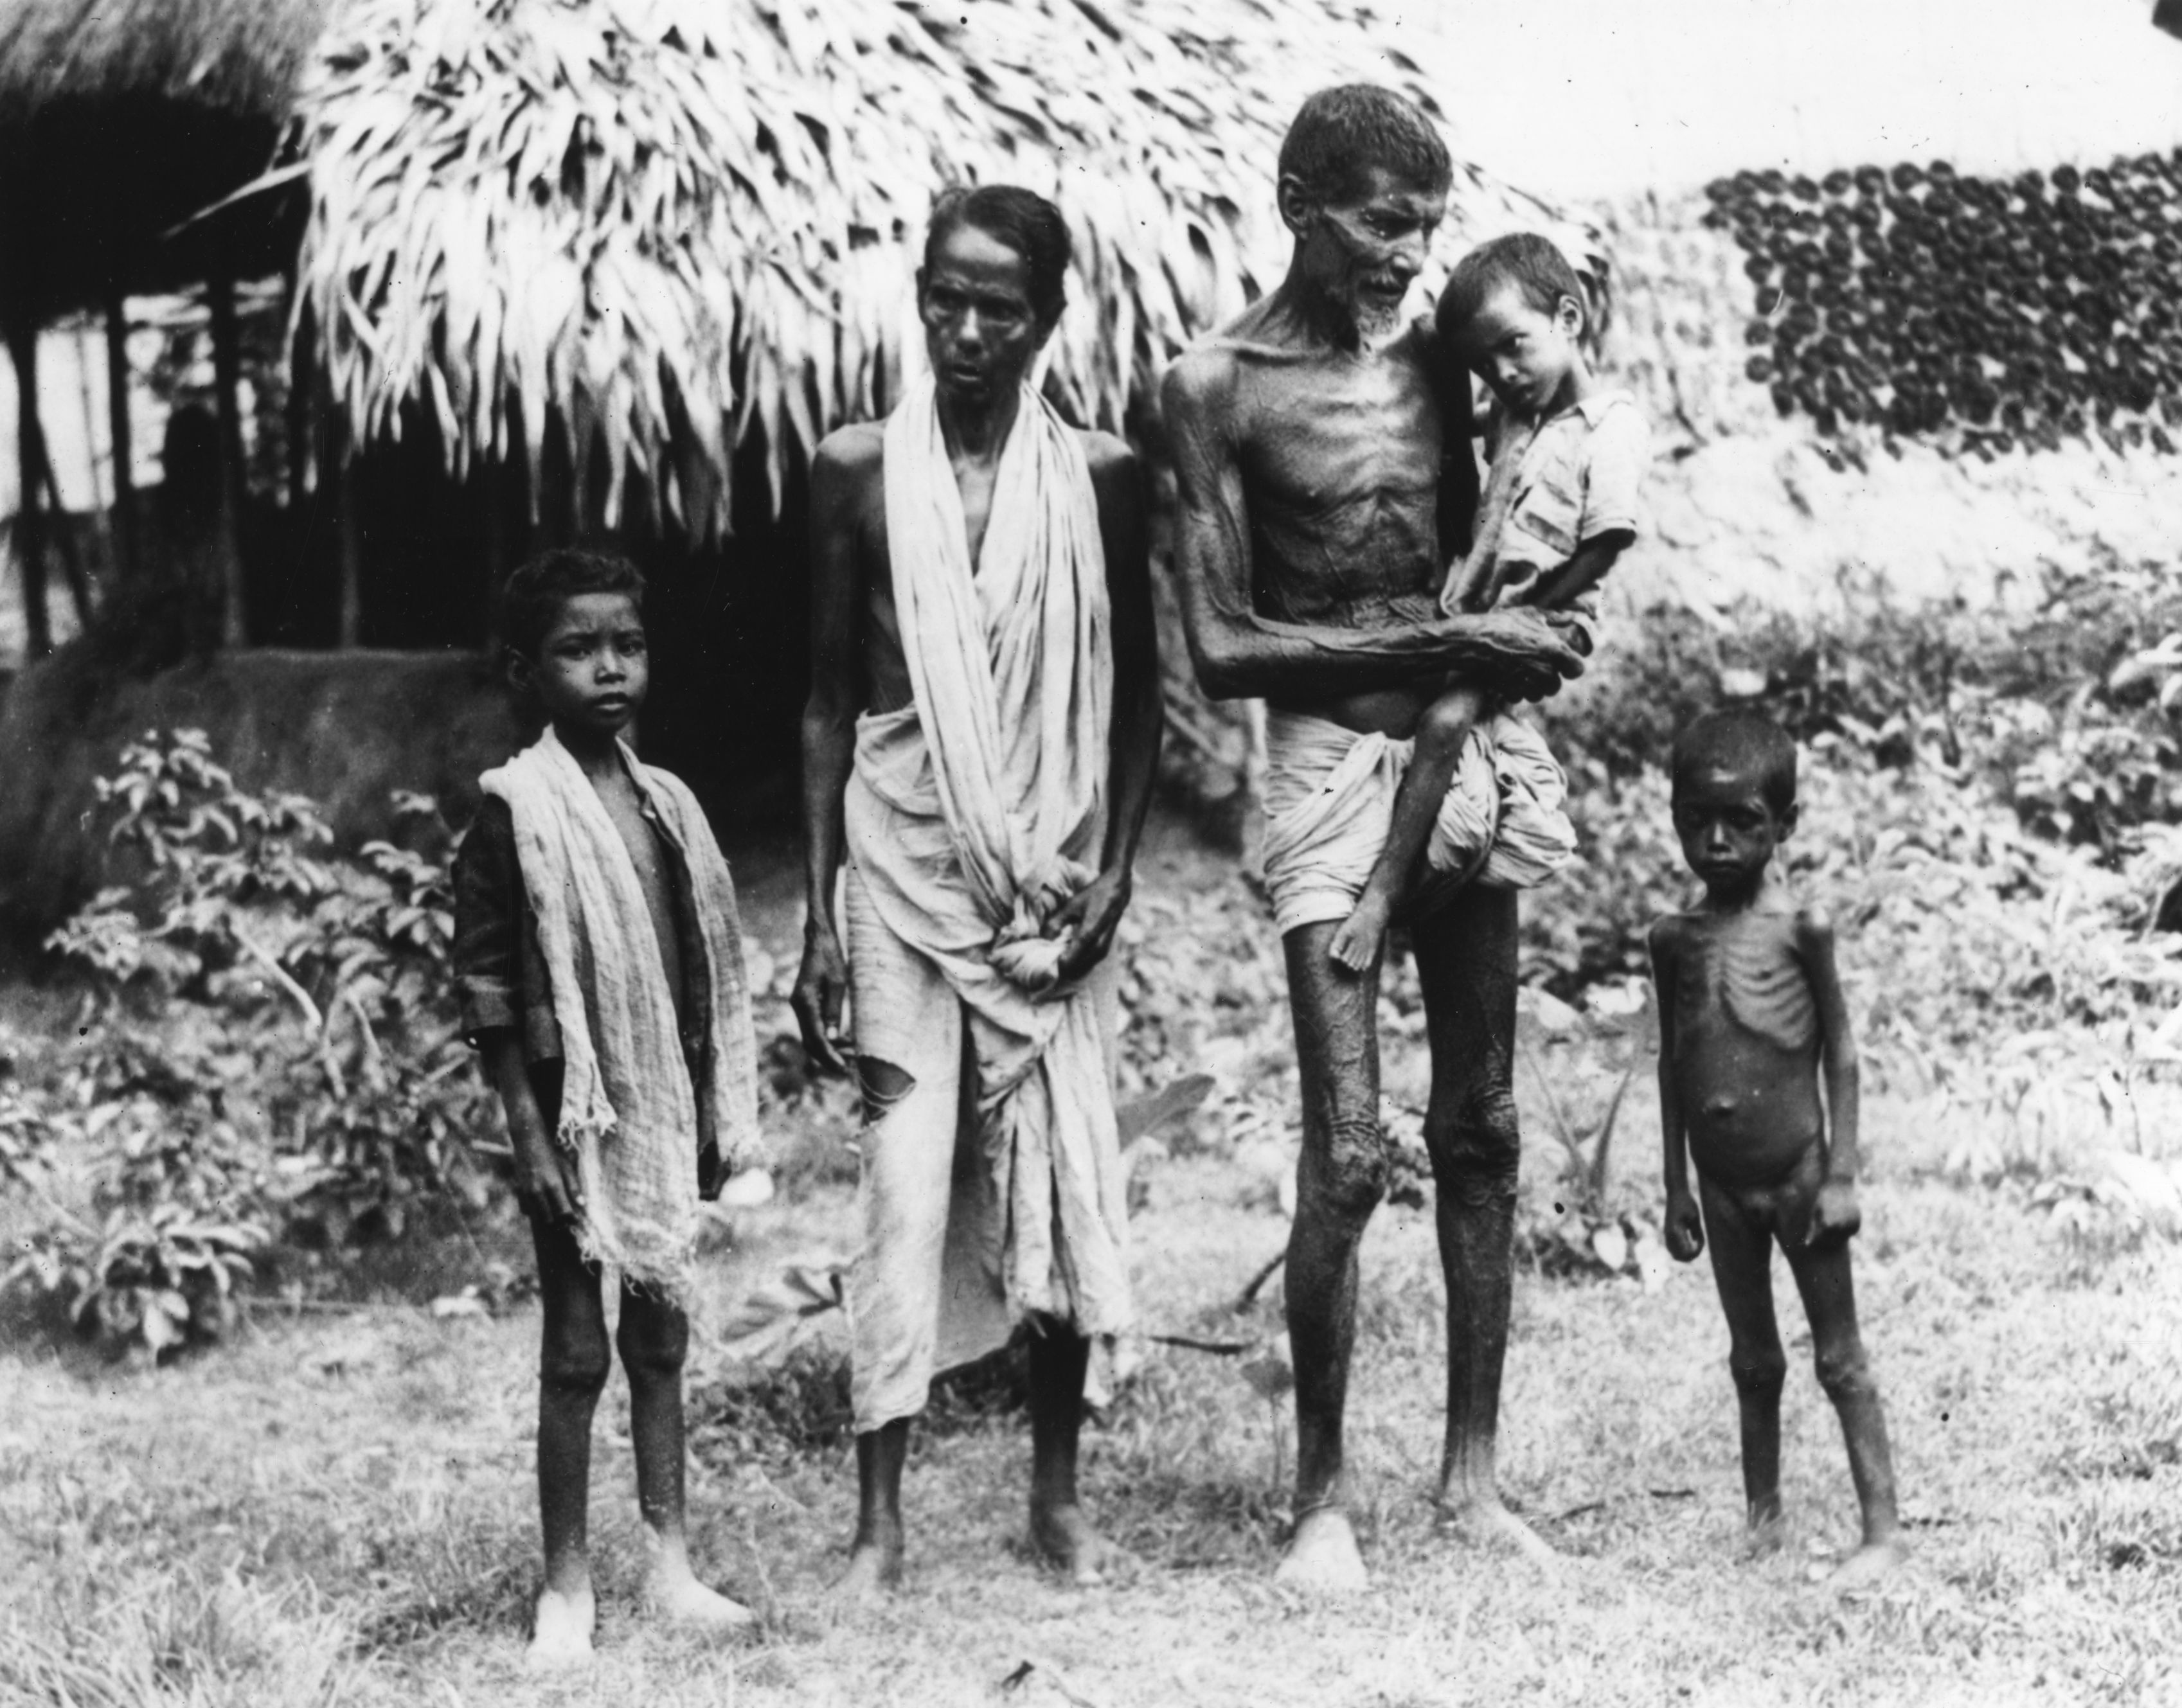 A family of semi-starved Indians who have arrived in Calcutta in search of food. (Photo by Keystone/Getty Images)